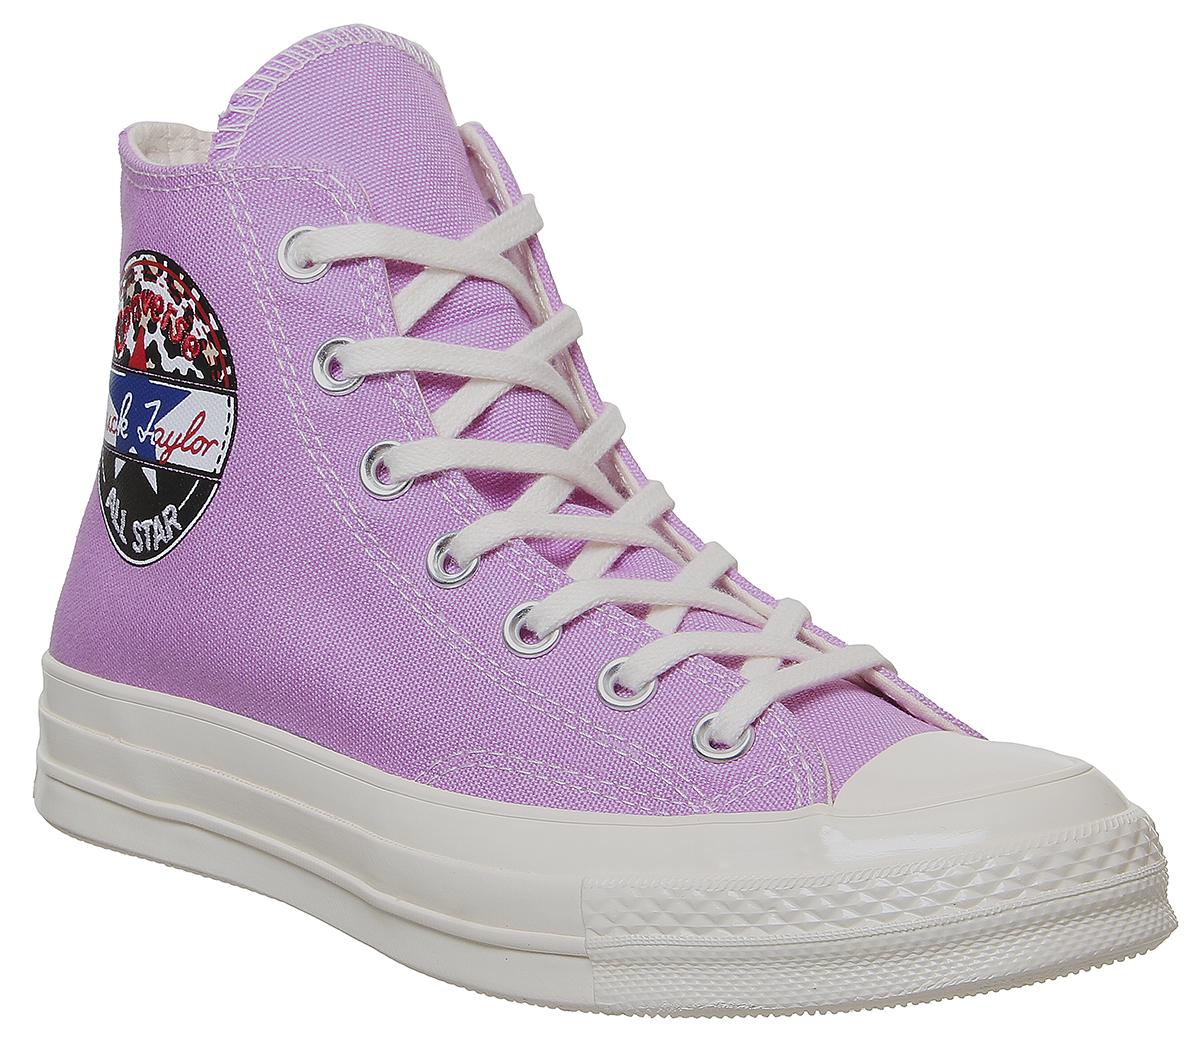 ConverseAll Star Hi 70s TrainersPeony Pink Egret Black Exclusive